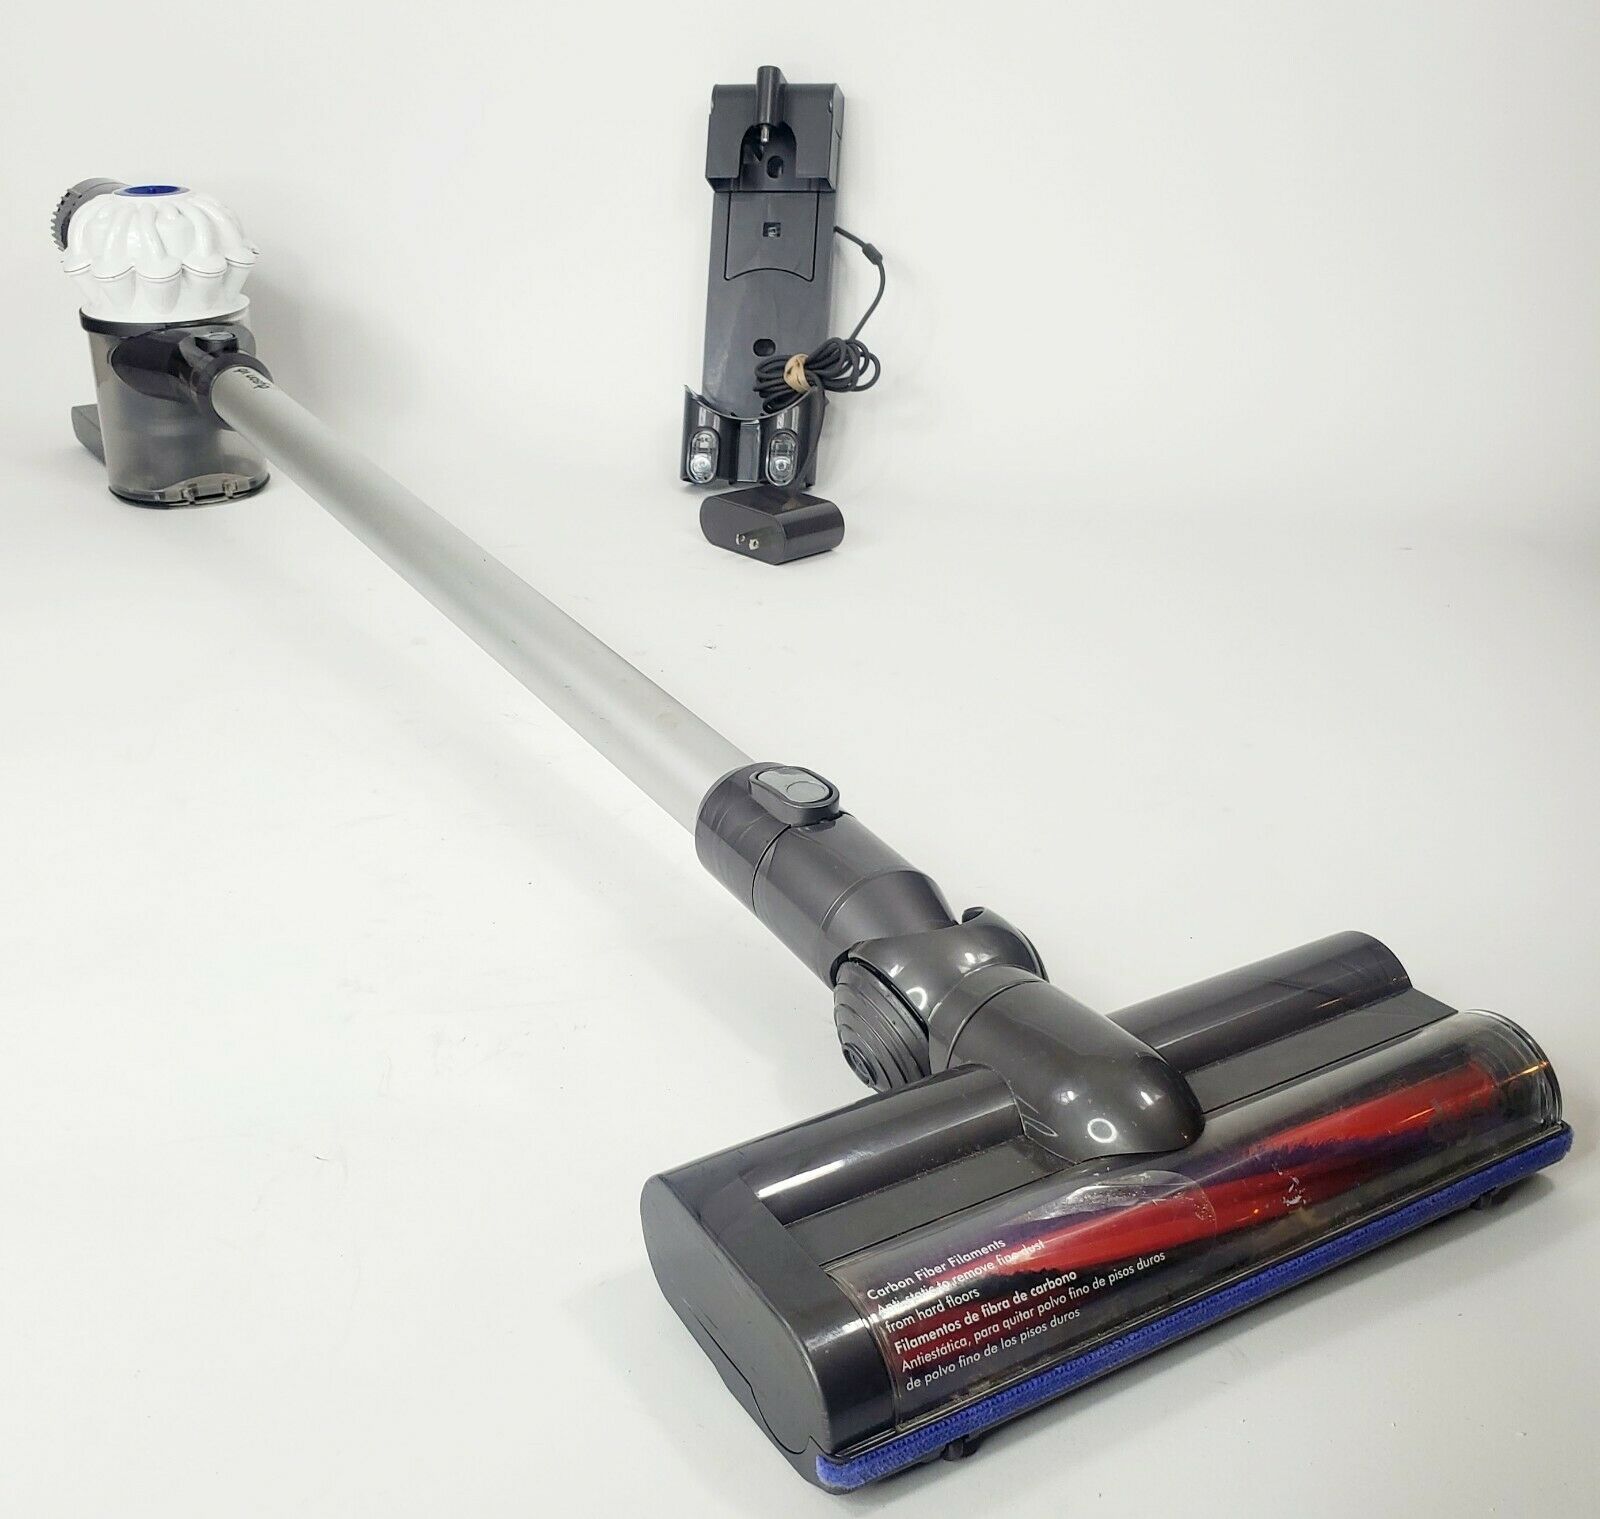 Dyson V6 Slim Cordless Stick Vacuum SV03 w/ Battery, Charger & Wall Mount